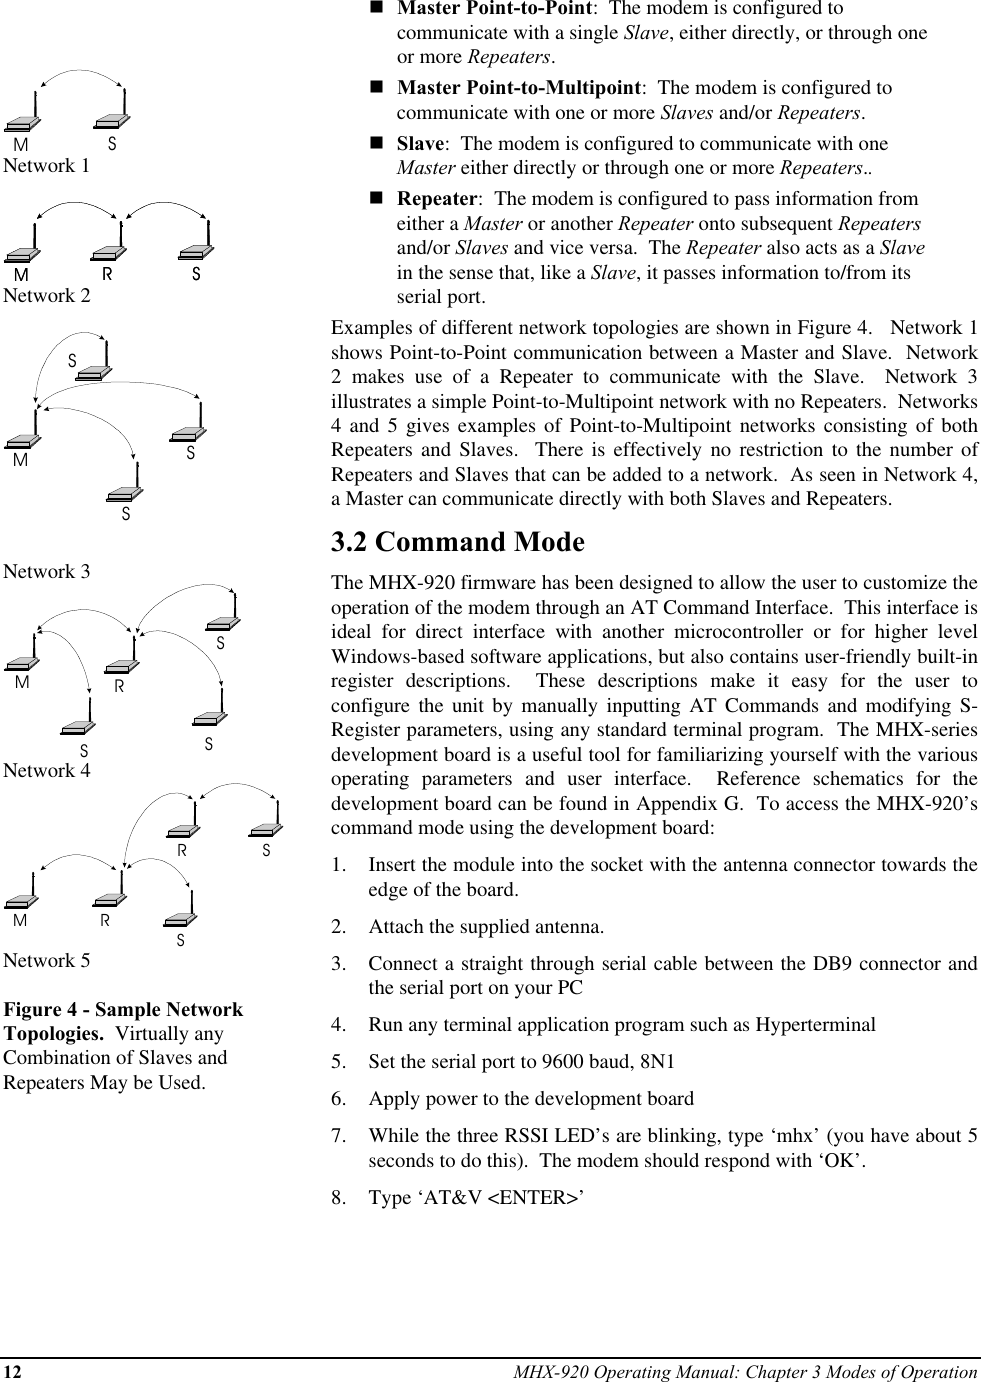 12 MHX-920 Operating Manual: Chapter 3 Modes of OperationMSNetwork 1MSRMSRNetwork 2MSSSNetwork 3MRSSSNetwork 4MRSRSNetwork 5Figure 4 - Sample NetworkTopologies.  Virtually anyCombination of Slaves andRepeaters May be Used.nMaster Point-to-Point:  The modem is configured tocommunicate with a single Slave, either directly, or through oneor more Repeaters.nMaster Point-to-Multipoint:  The modem is configured tocommunicate with one or more Slaves and/or Repeaters.nSlave:  The modem is configured to communicate with oneMaster either directly or through one or more Repeaters..nRepeater:  The modem is configured to pass information fromeither a Master or another Repeater onto subsequent Repeatersand/or Slaves and vice versa.  The Repeater also acts as a Slavein the sense that, like a Slave, it passes information to/from itsserial port.Examples of different network topologies are shown in Figure 4.   Network 1shows Point-to-Point communication between a Master and Slave.  Network2 makes use of a Repeater to communicate with the Slave.  Network 3illustrates a simple Point-to-Multipoint network with no Repeaters.  Networks4 and 5 gives examples of Point-to-Multipoint networks consisting of bothRepeaters and Slaves.  There is effectively no restriction to the number ofRepeaters and Slaves that can be added to a network.  As seen in Network 4,a Master can communicate directly with both Slaves and Repeaters.3.2 Command ModeThe MHX-920 firmware has been designed to allow the user to customize theoperation of the modem through an AT Command Interface.  This interface isideal for direct interface with another microcontroller or for higher levelWindows-based software applications, but also contains user-friendly built-inregister descriptions.  These descriptions make it easy for the user toconfigure the unit by manually inputting AT Commands and modifying S-Register parameters, using any standard terminal program.  The MHX-seriesdevelopment board is a useful tool for familiarizing yourself with the variousoperating parameters and user interface.  Reference schematics for thedevelopment board can be found in Appendix G.  To access the MHX-920’scommand mode using the development board:1.  Insert the module into the socket with the antenna connector towards theedge of the board.2.  Attach the supplied antenna.3.  Connect a straight through serial cable between the DB9 connector andthe serial port on your PC4.  Run any terminal application program such as Hyperterminal5.  Set the serial port to 9600 baud, 8N16.  Apply power to the development board7.  While the three RSSI LED’s are blinking, type ‘mhx’ (you have about 5seconds to do this).  The modem should respond with ‘OK’.8.  Type ‘AT&amp;V &lt;ENTER&gt;’